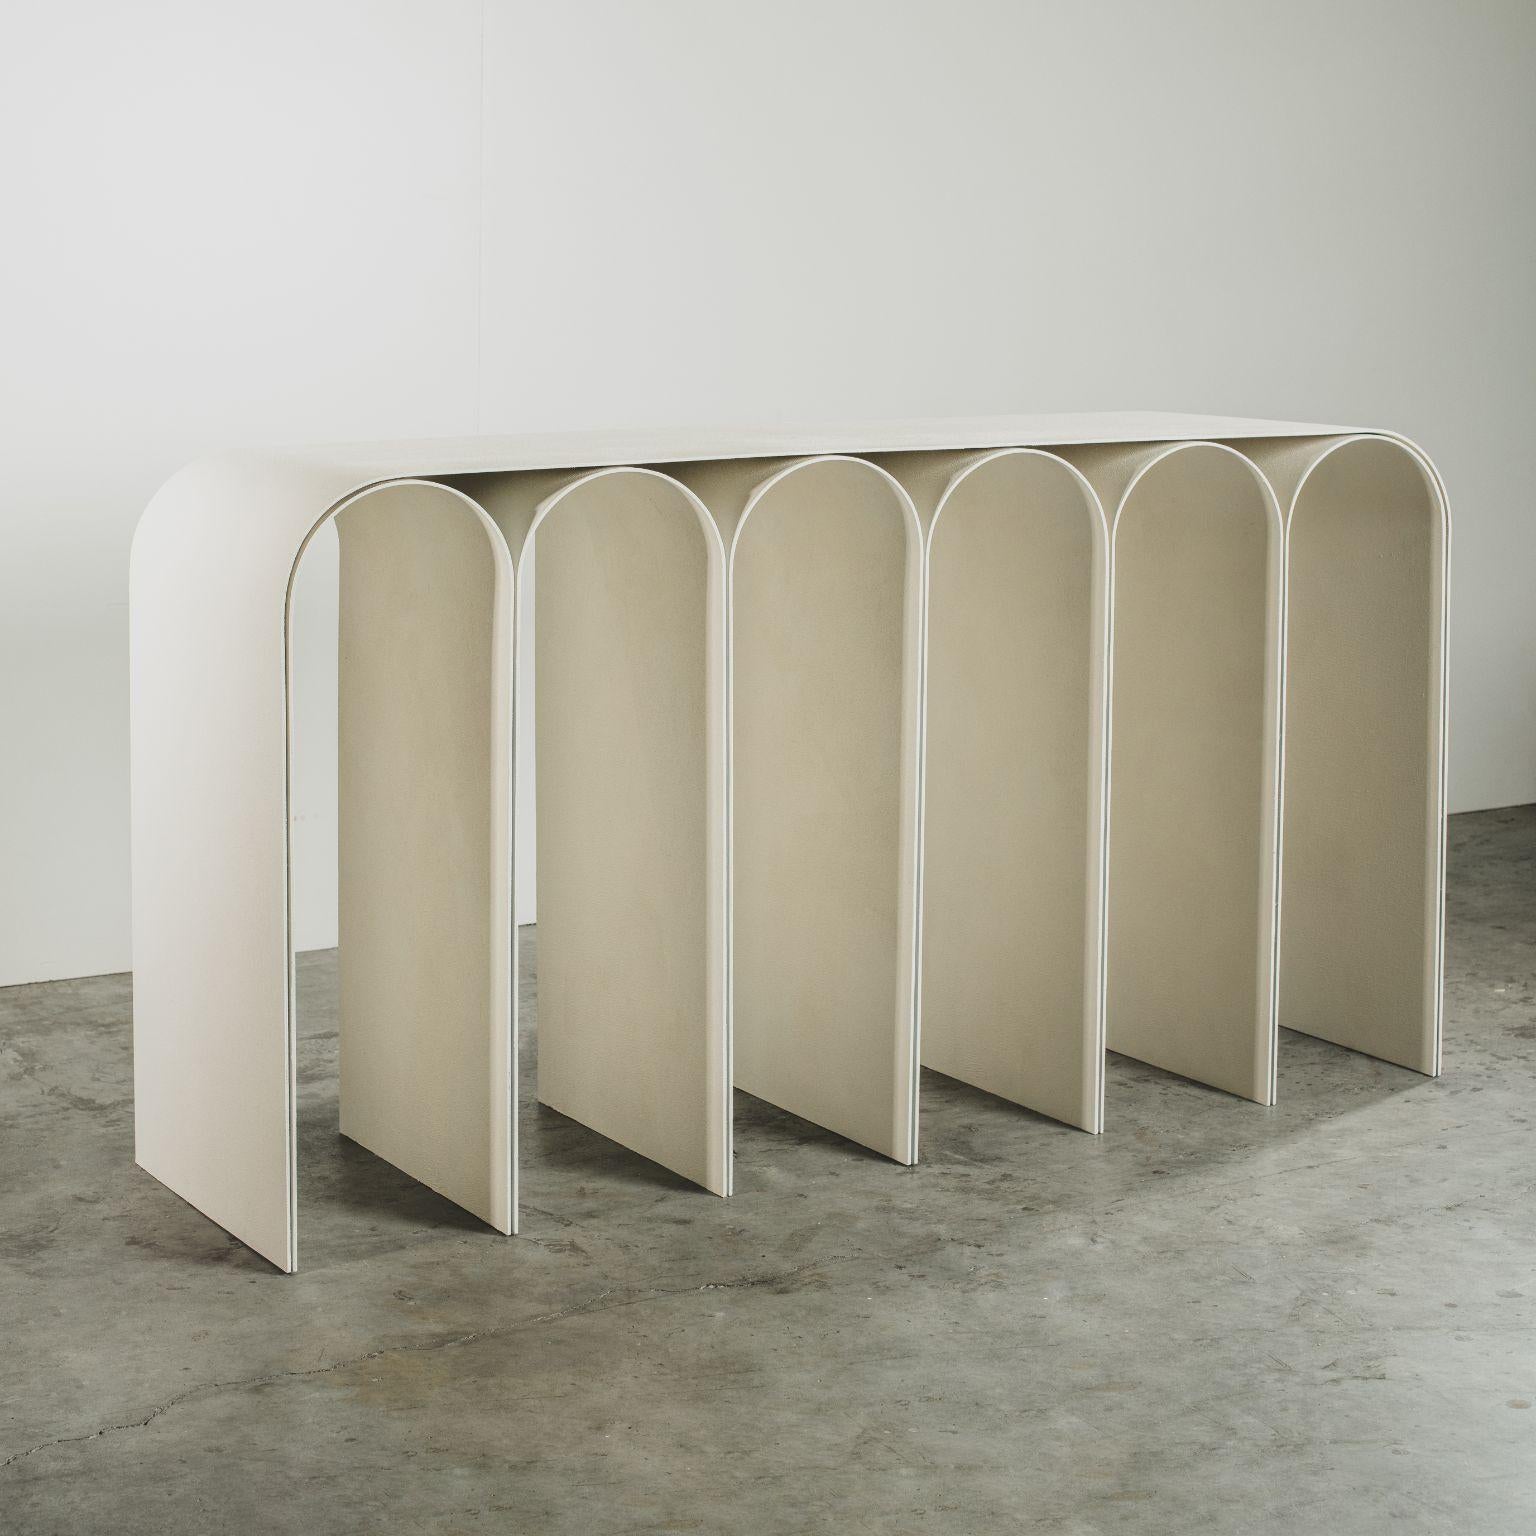 White arch console by Pietro Franceschini
Sold exclusively by Galerie Philia
Dimensions: W 150 x L 47 x H 83
Materials: Aluminium, white plaster

Made to order dimensions can be ordered.

Also available:
Steel (brass finish, blackened,